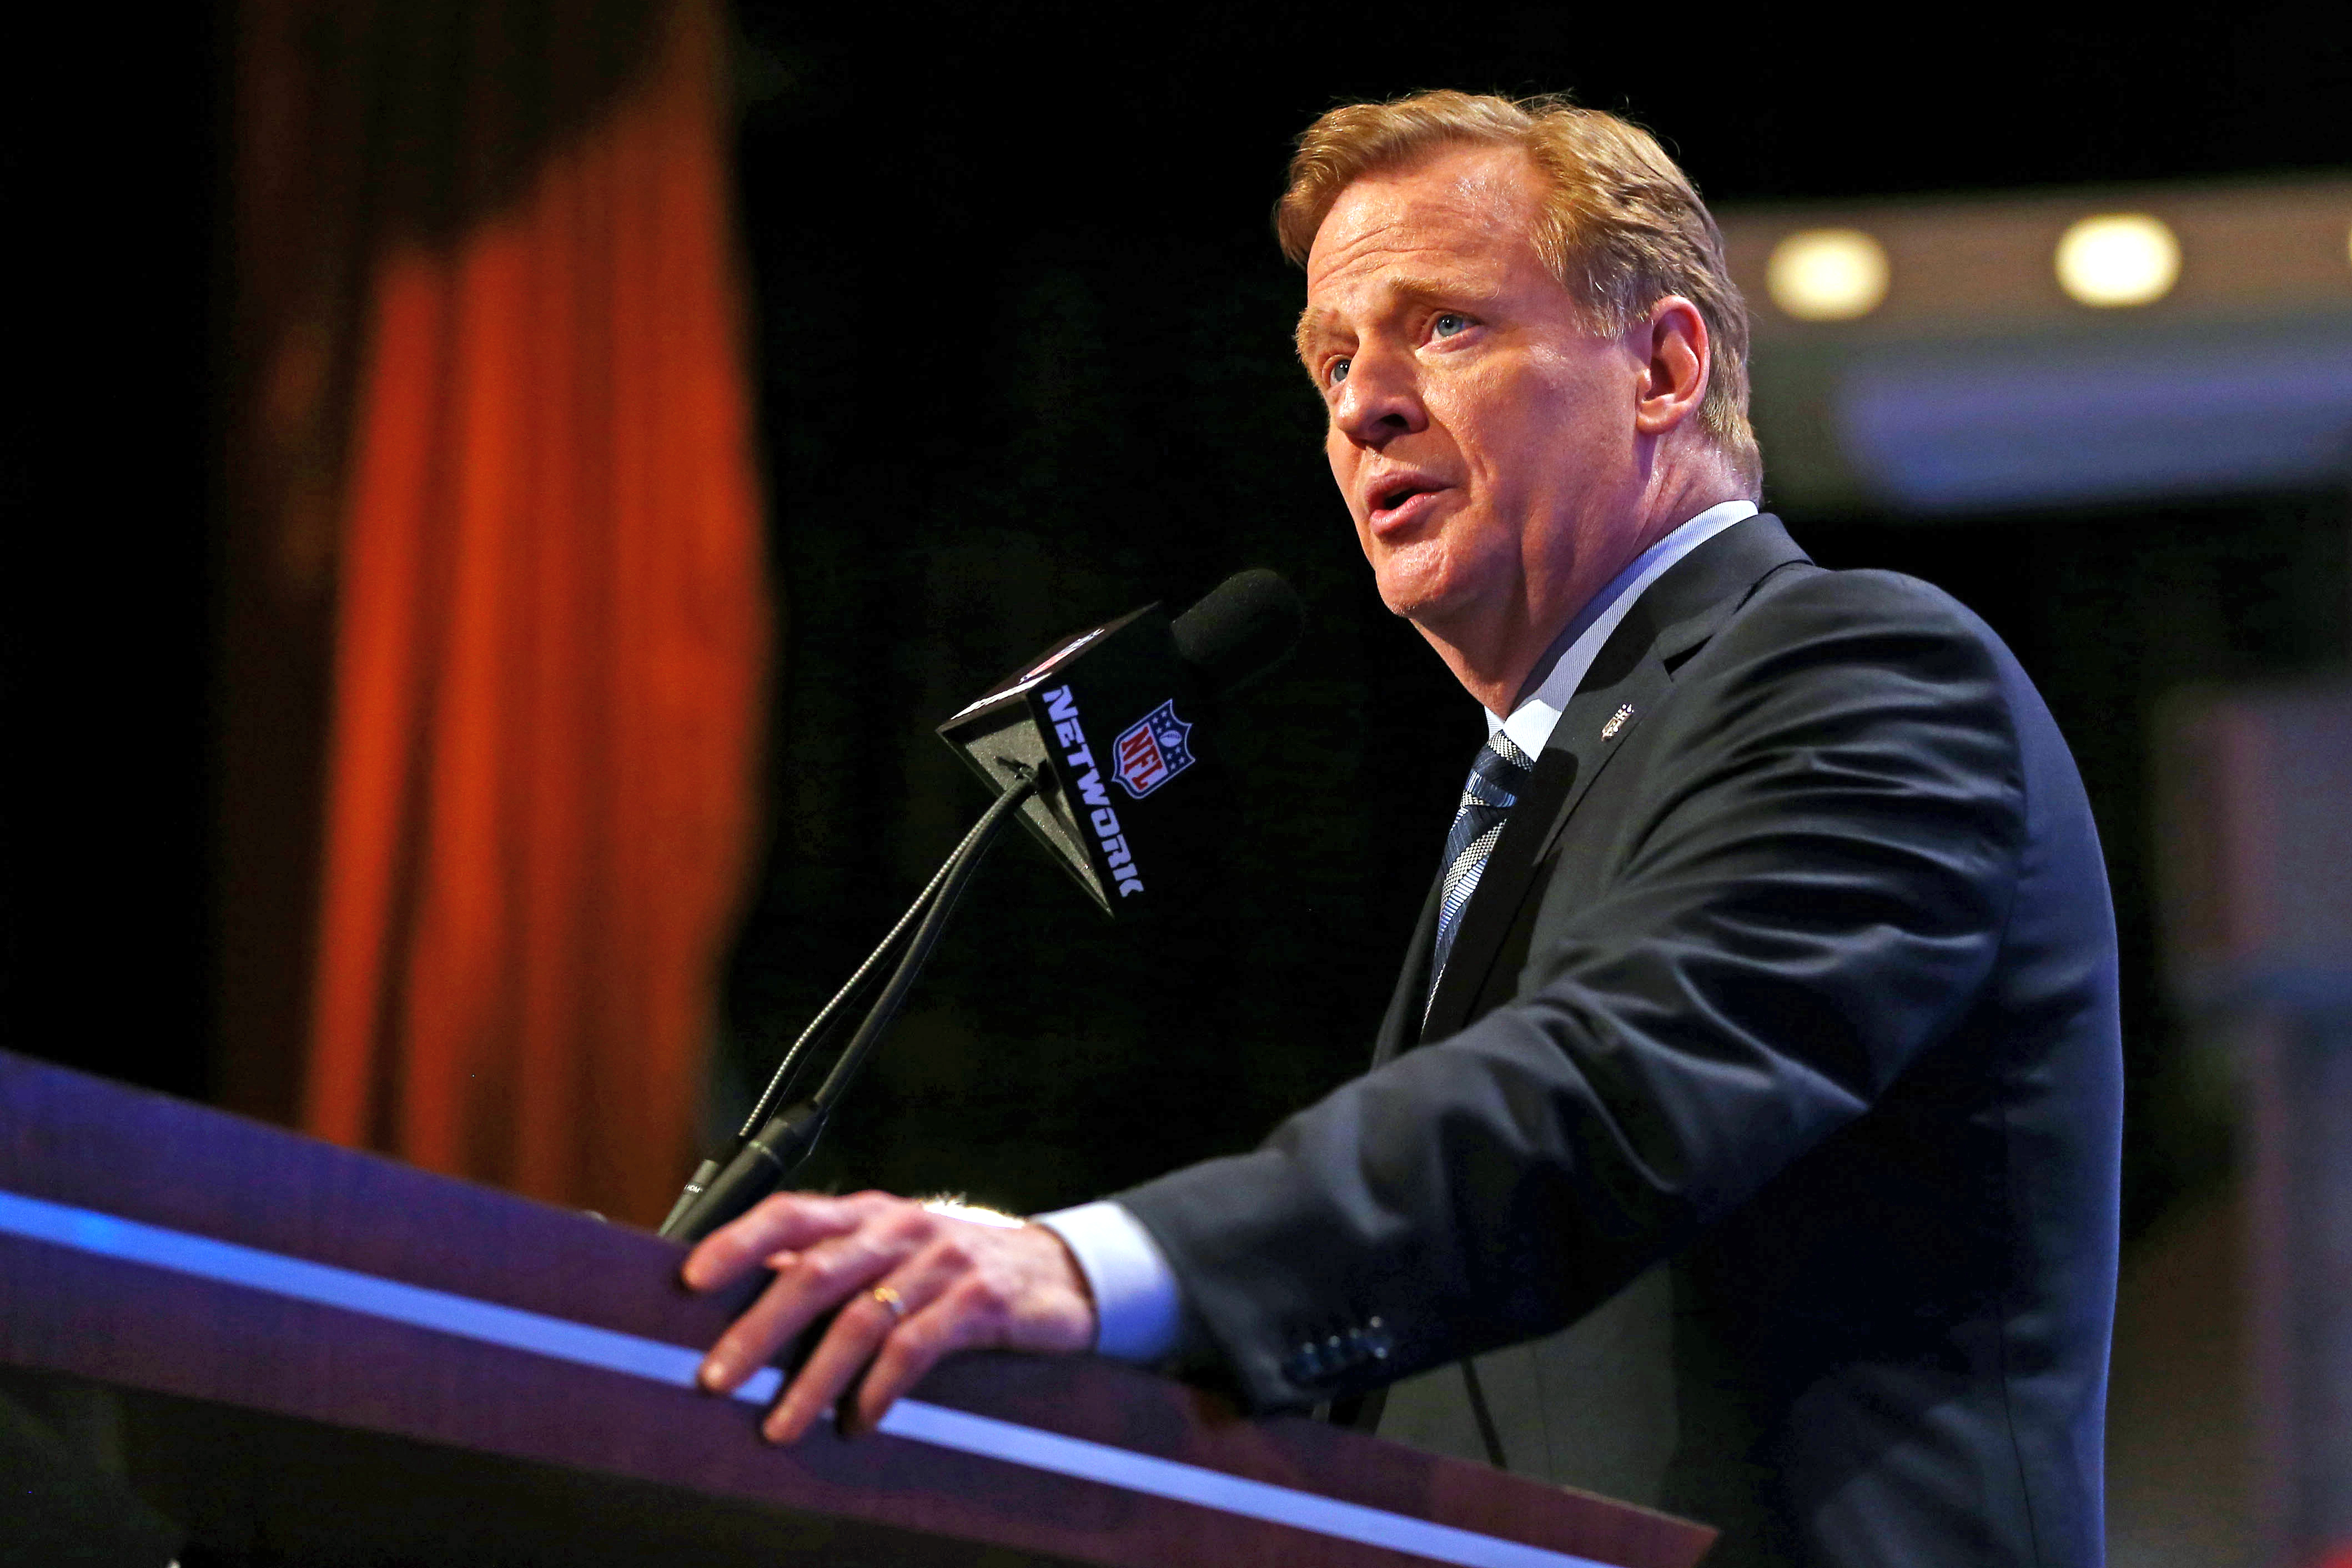 NFL Commissioner Roger Goodell speaks during the first round of the 2014 NFL Draft at Radio City Music Hall on May 8, 2014 in New York City. (Elsa—Getty Images)